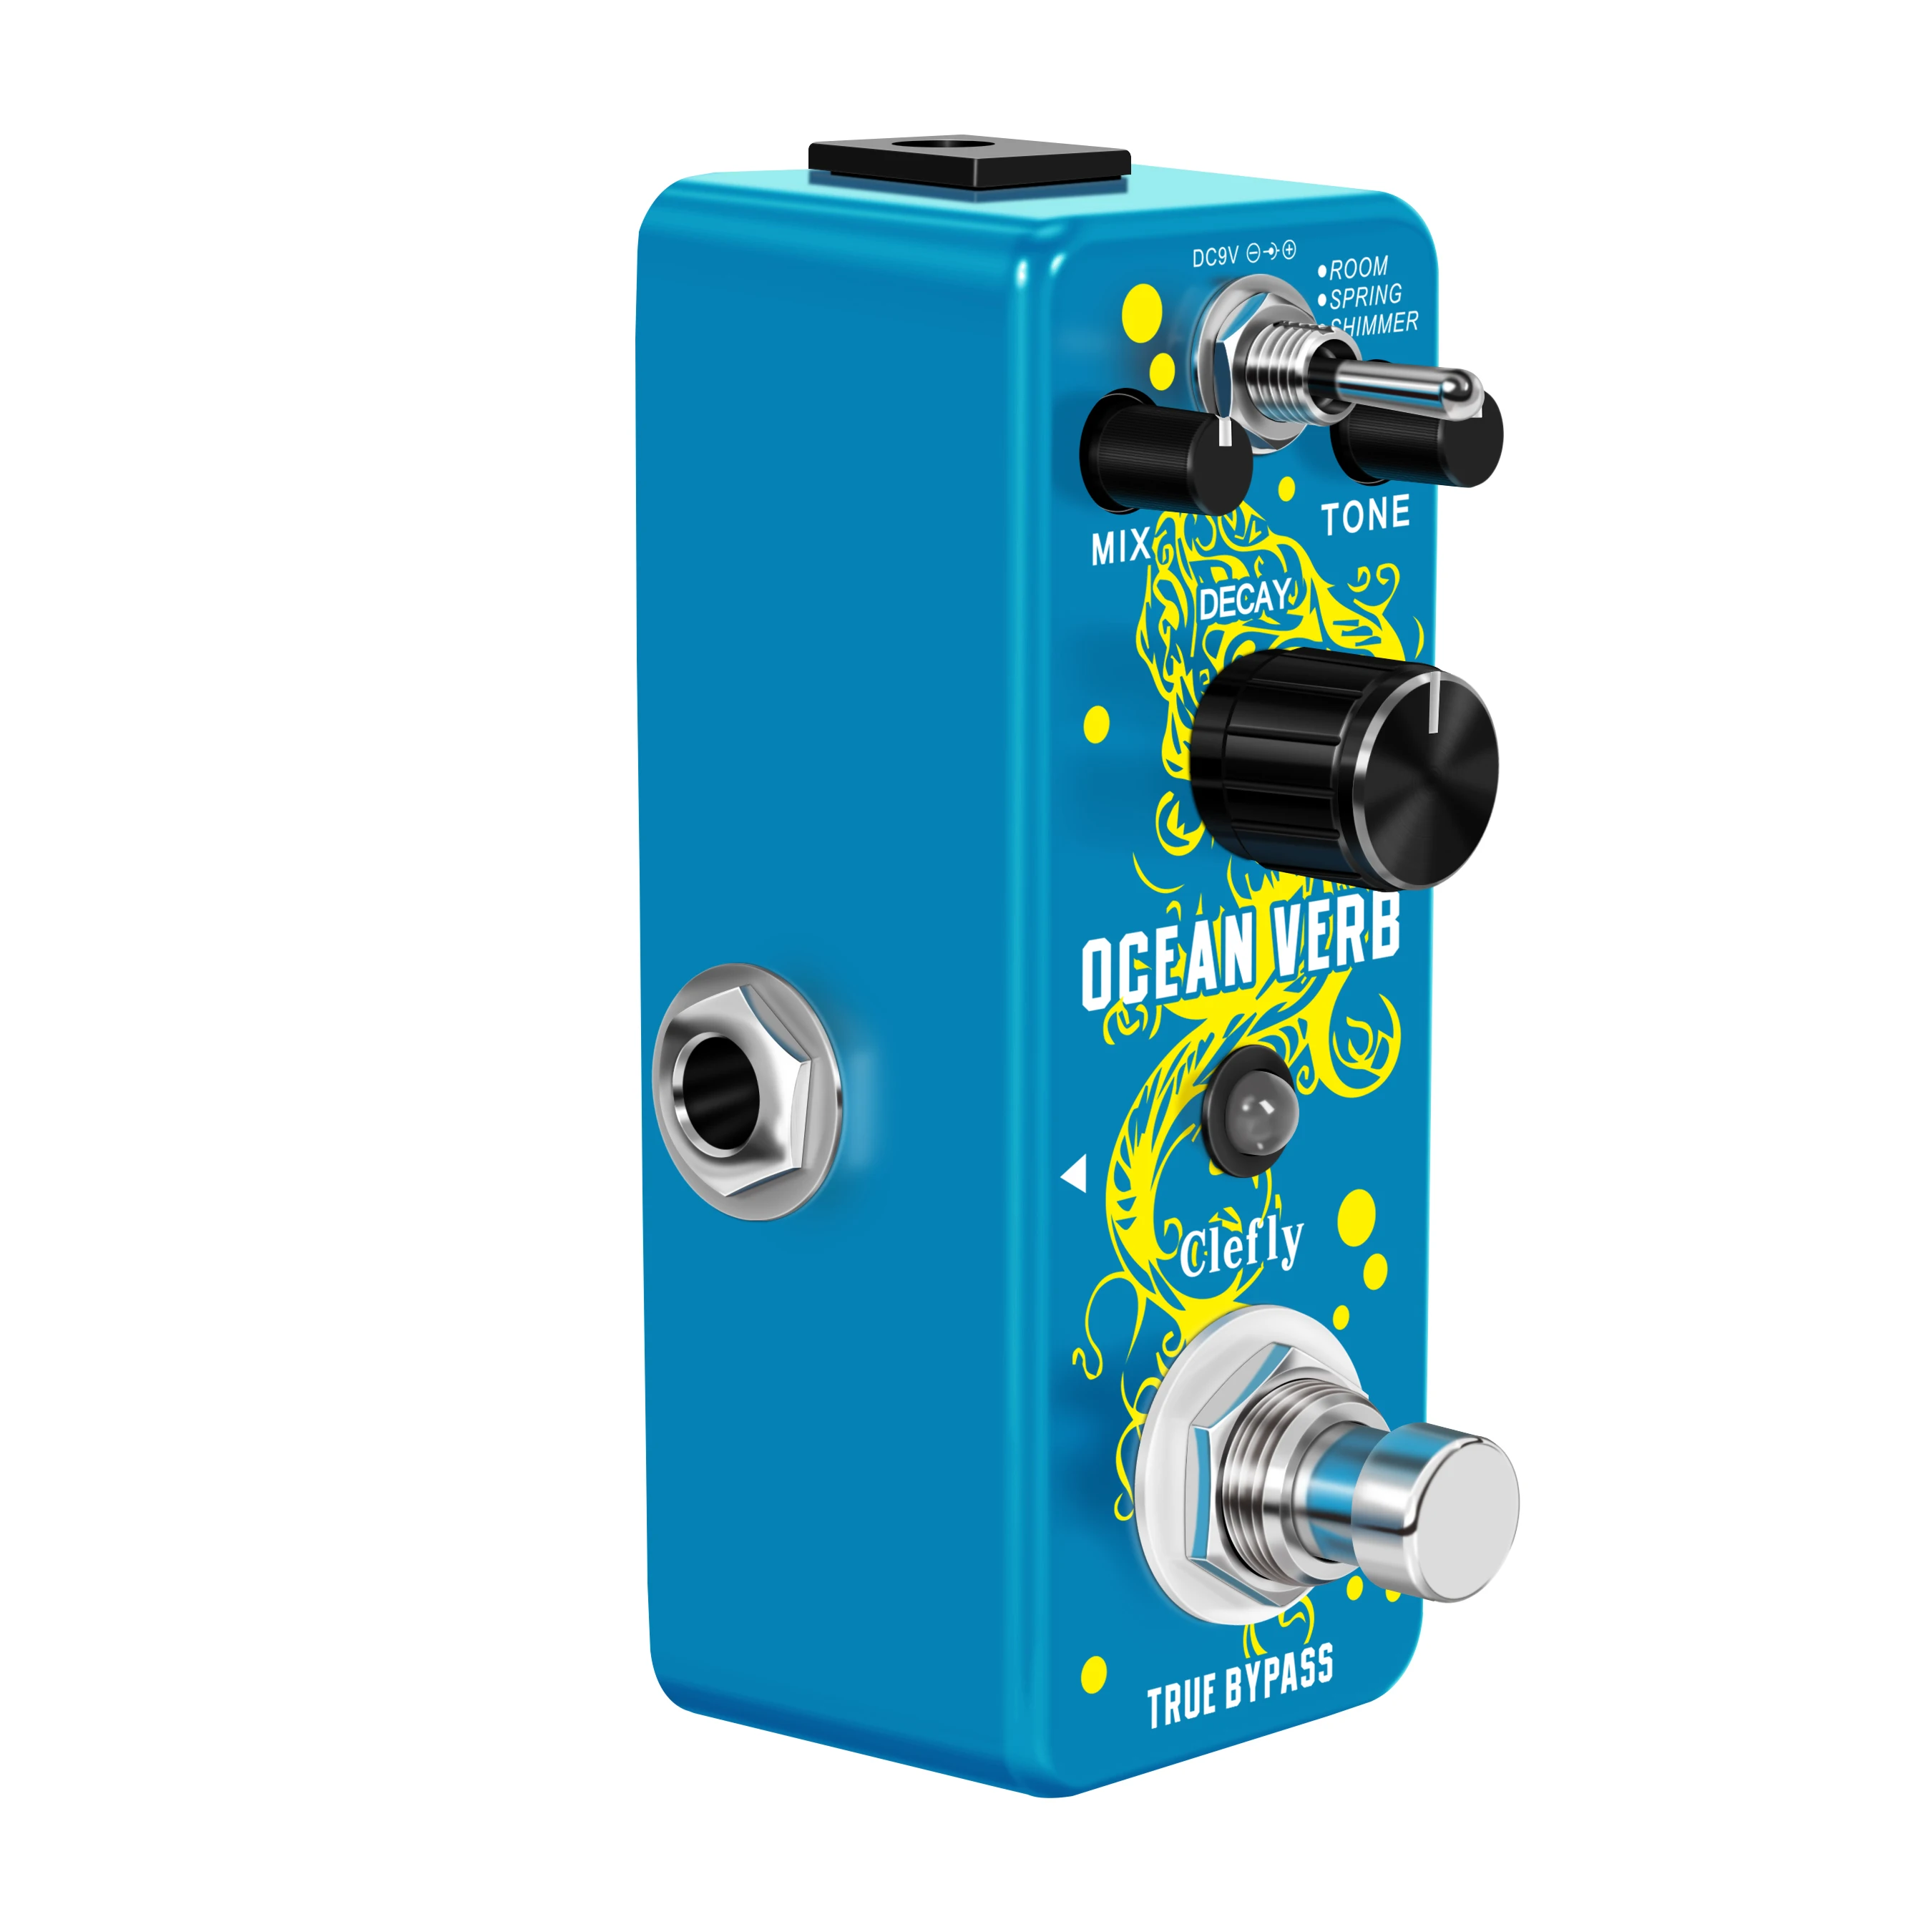 Clefly LEF-3800 Digital Reverb Pedal Guitar Ocean Verb Pedal Room Spring Shimmer 3 Modes Wide Range With Storage Of Timbre Pedal enlarge